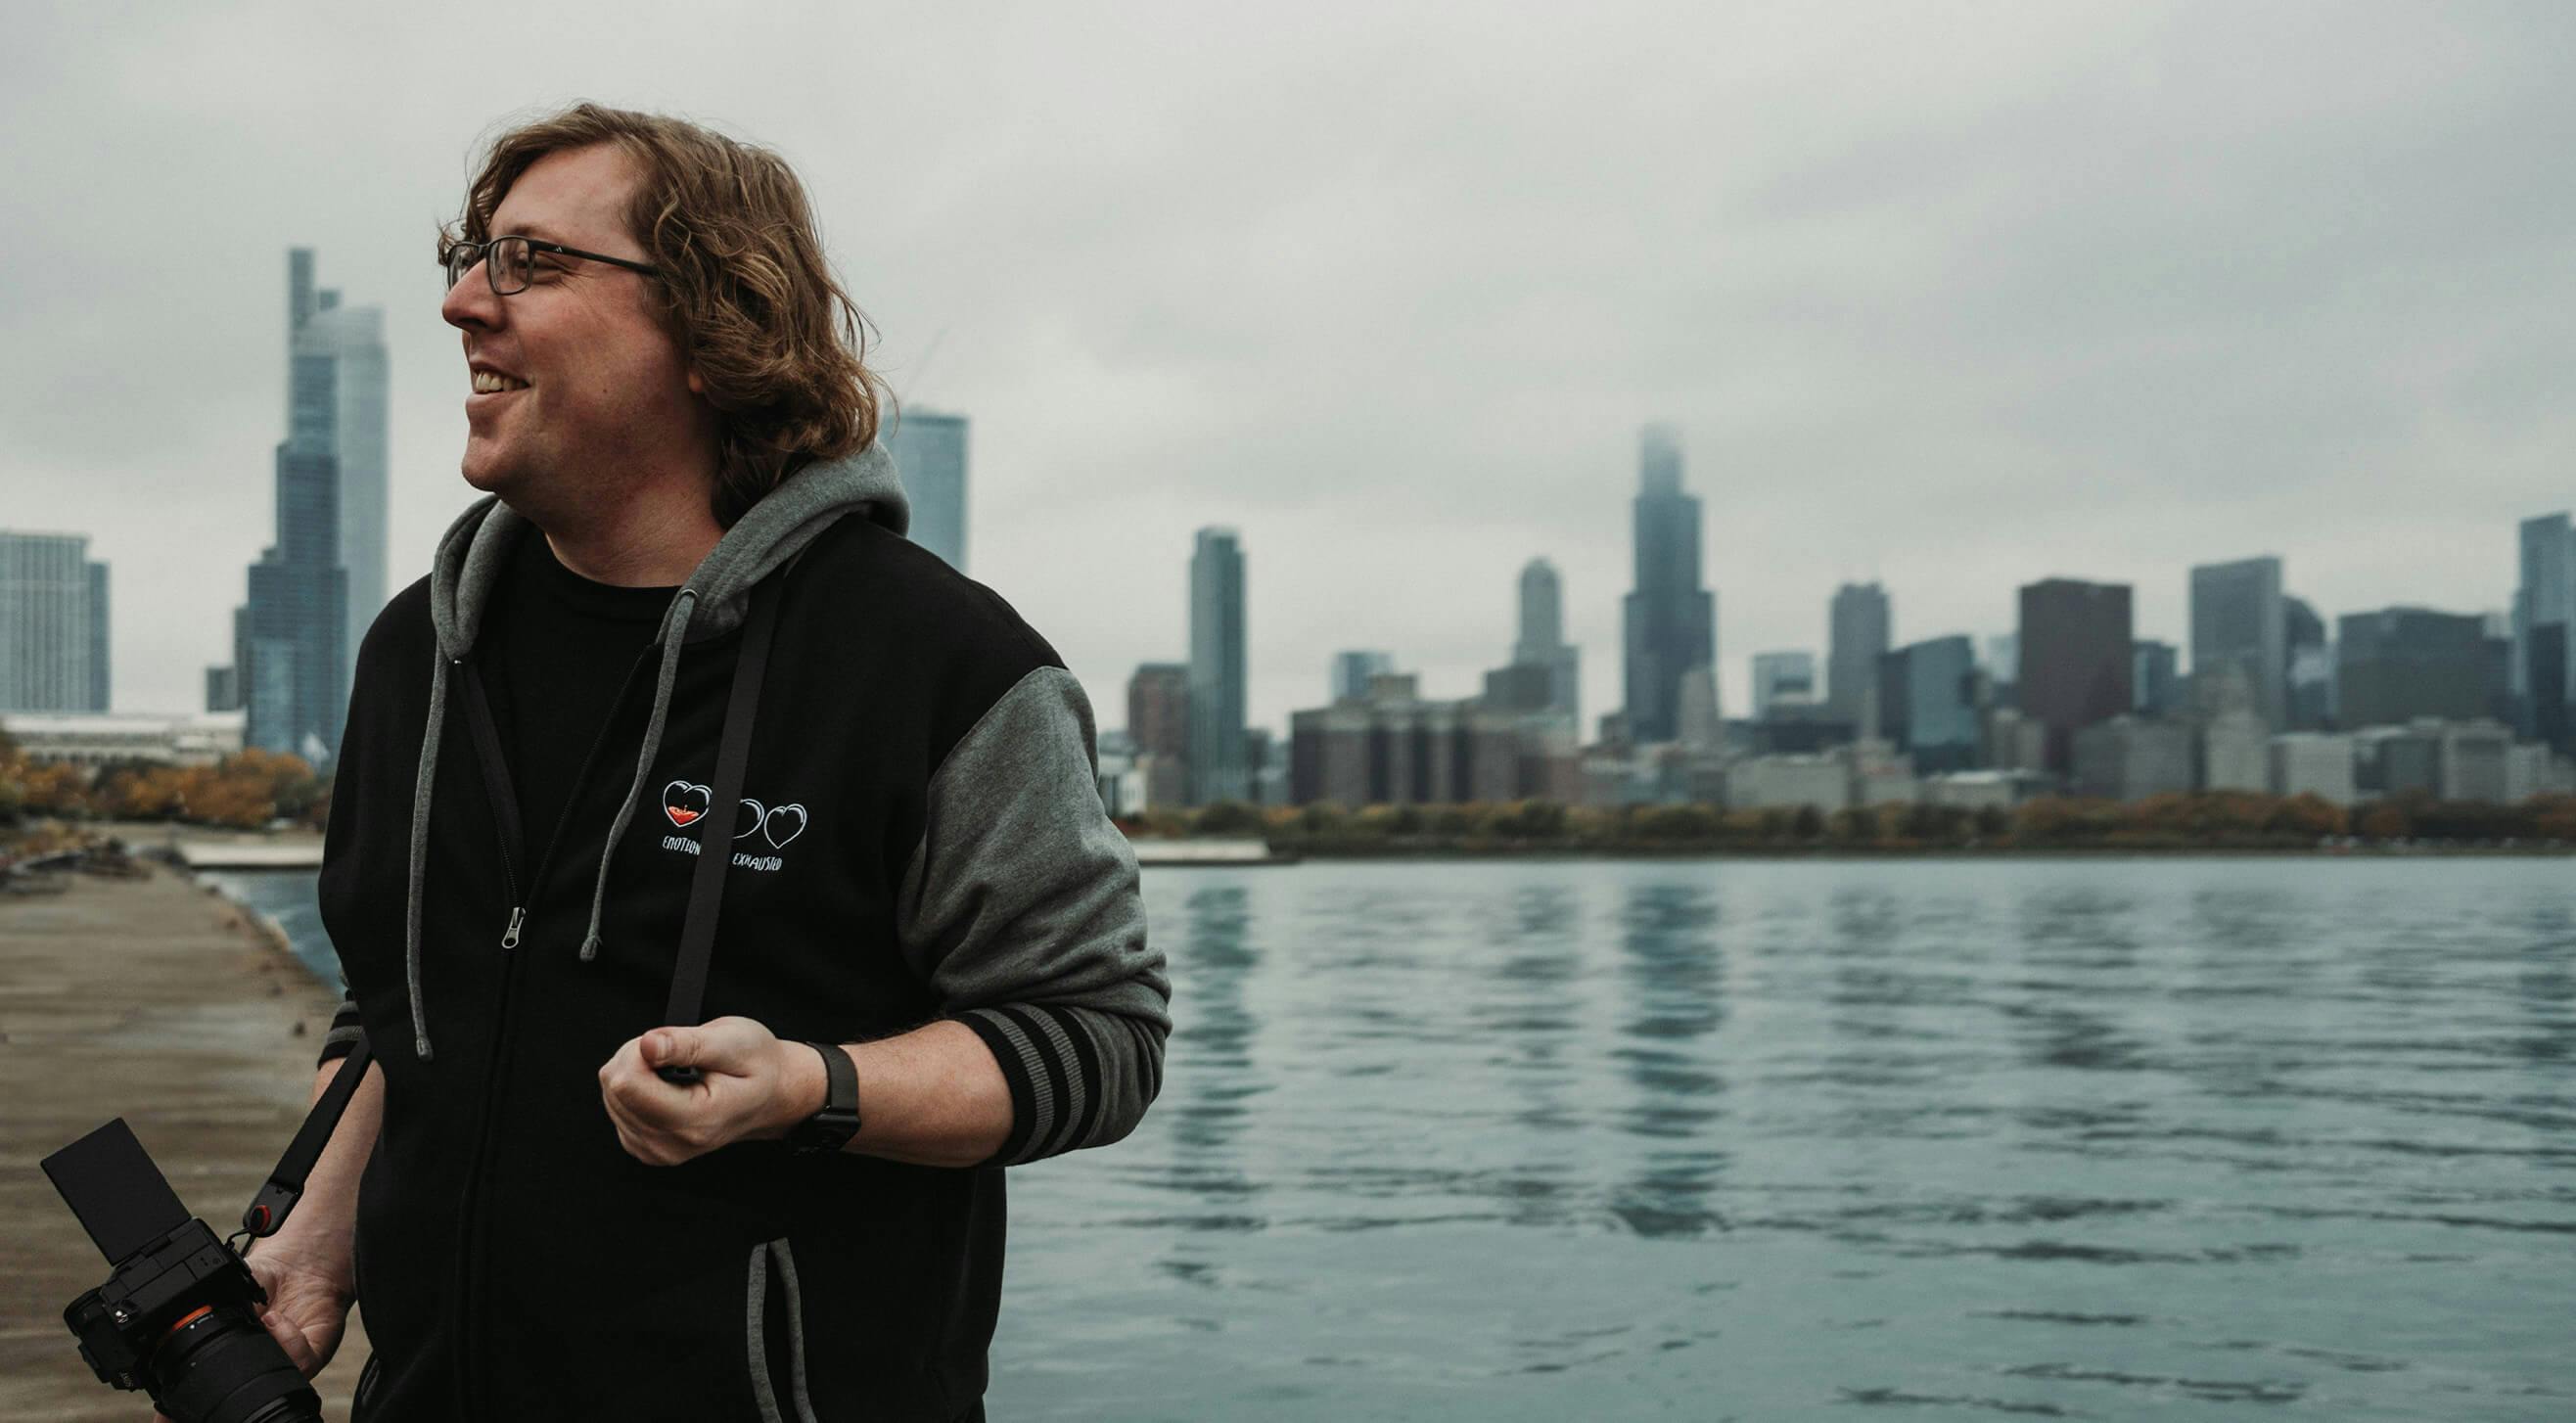 Photo of Josh in front of the Chicago city skyline